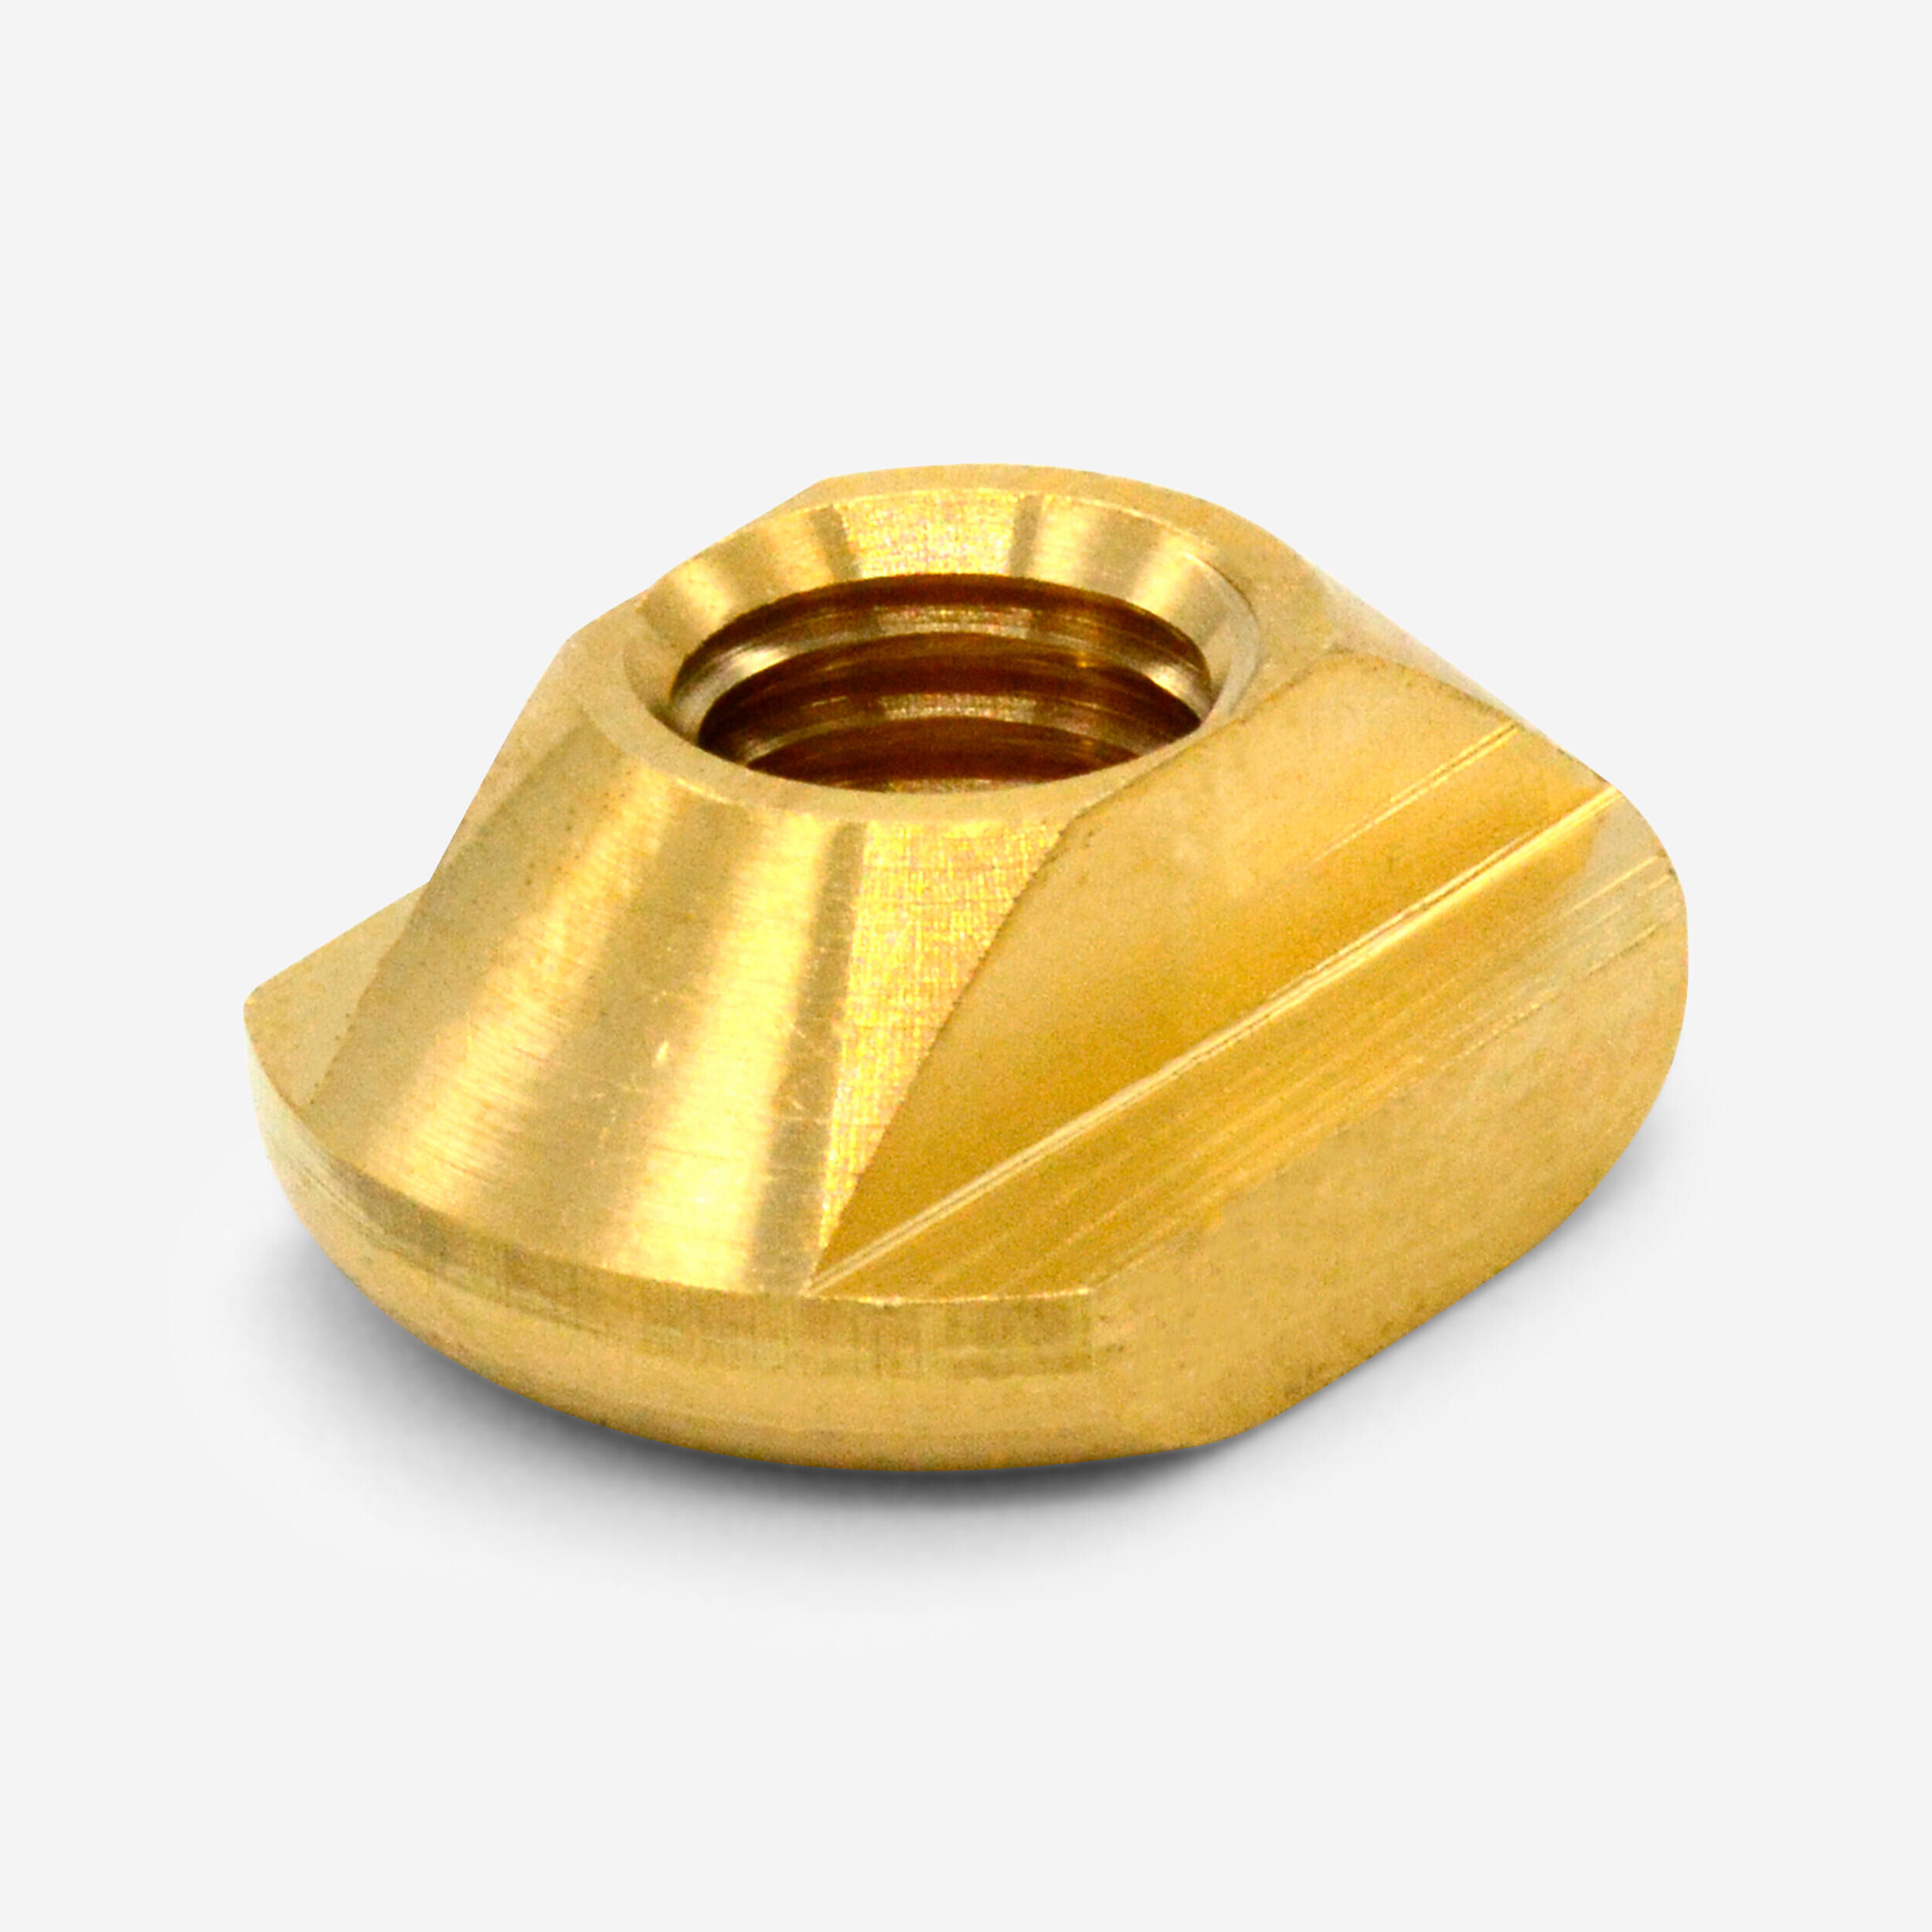 SIDE ON Screw-In Brass Square Nut for Windsurf Board Mast Base Plate.